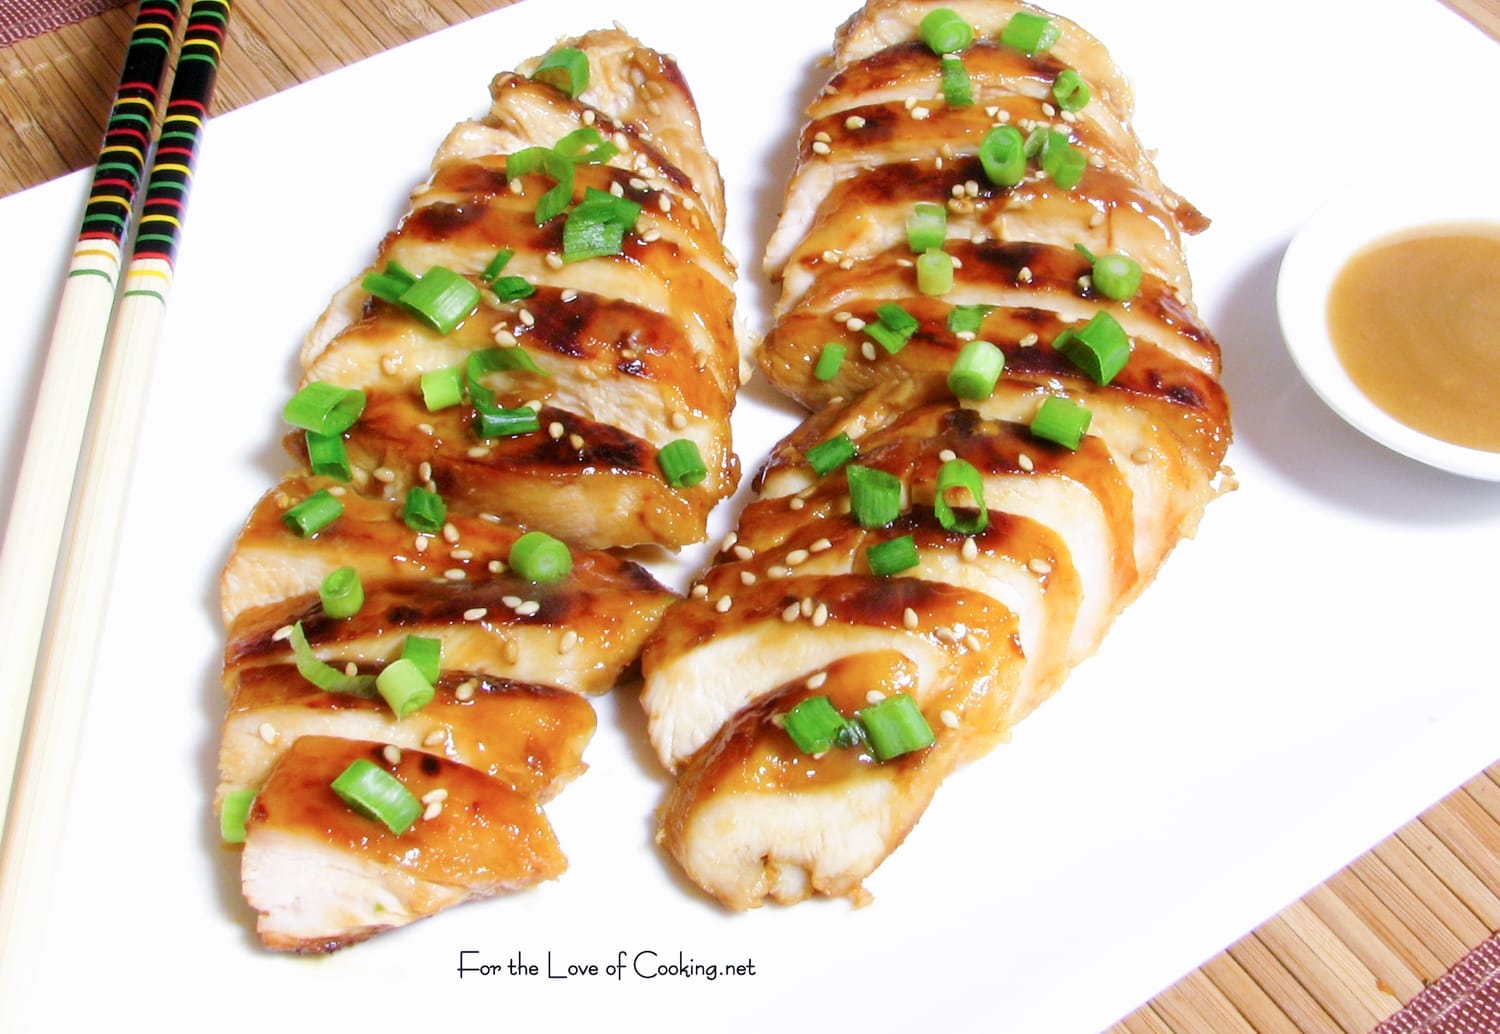 Honey-Ginger Chicken Breasts For the Love of Cooking pic